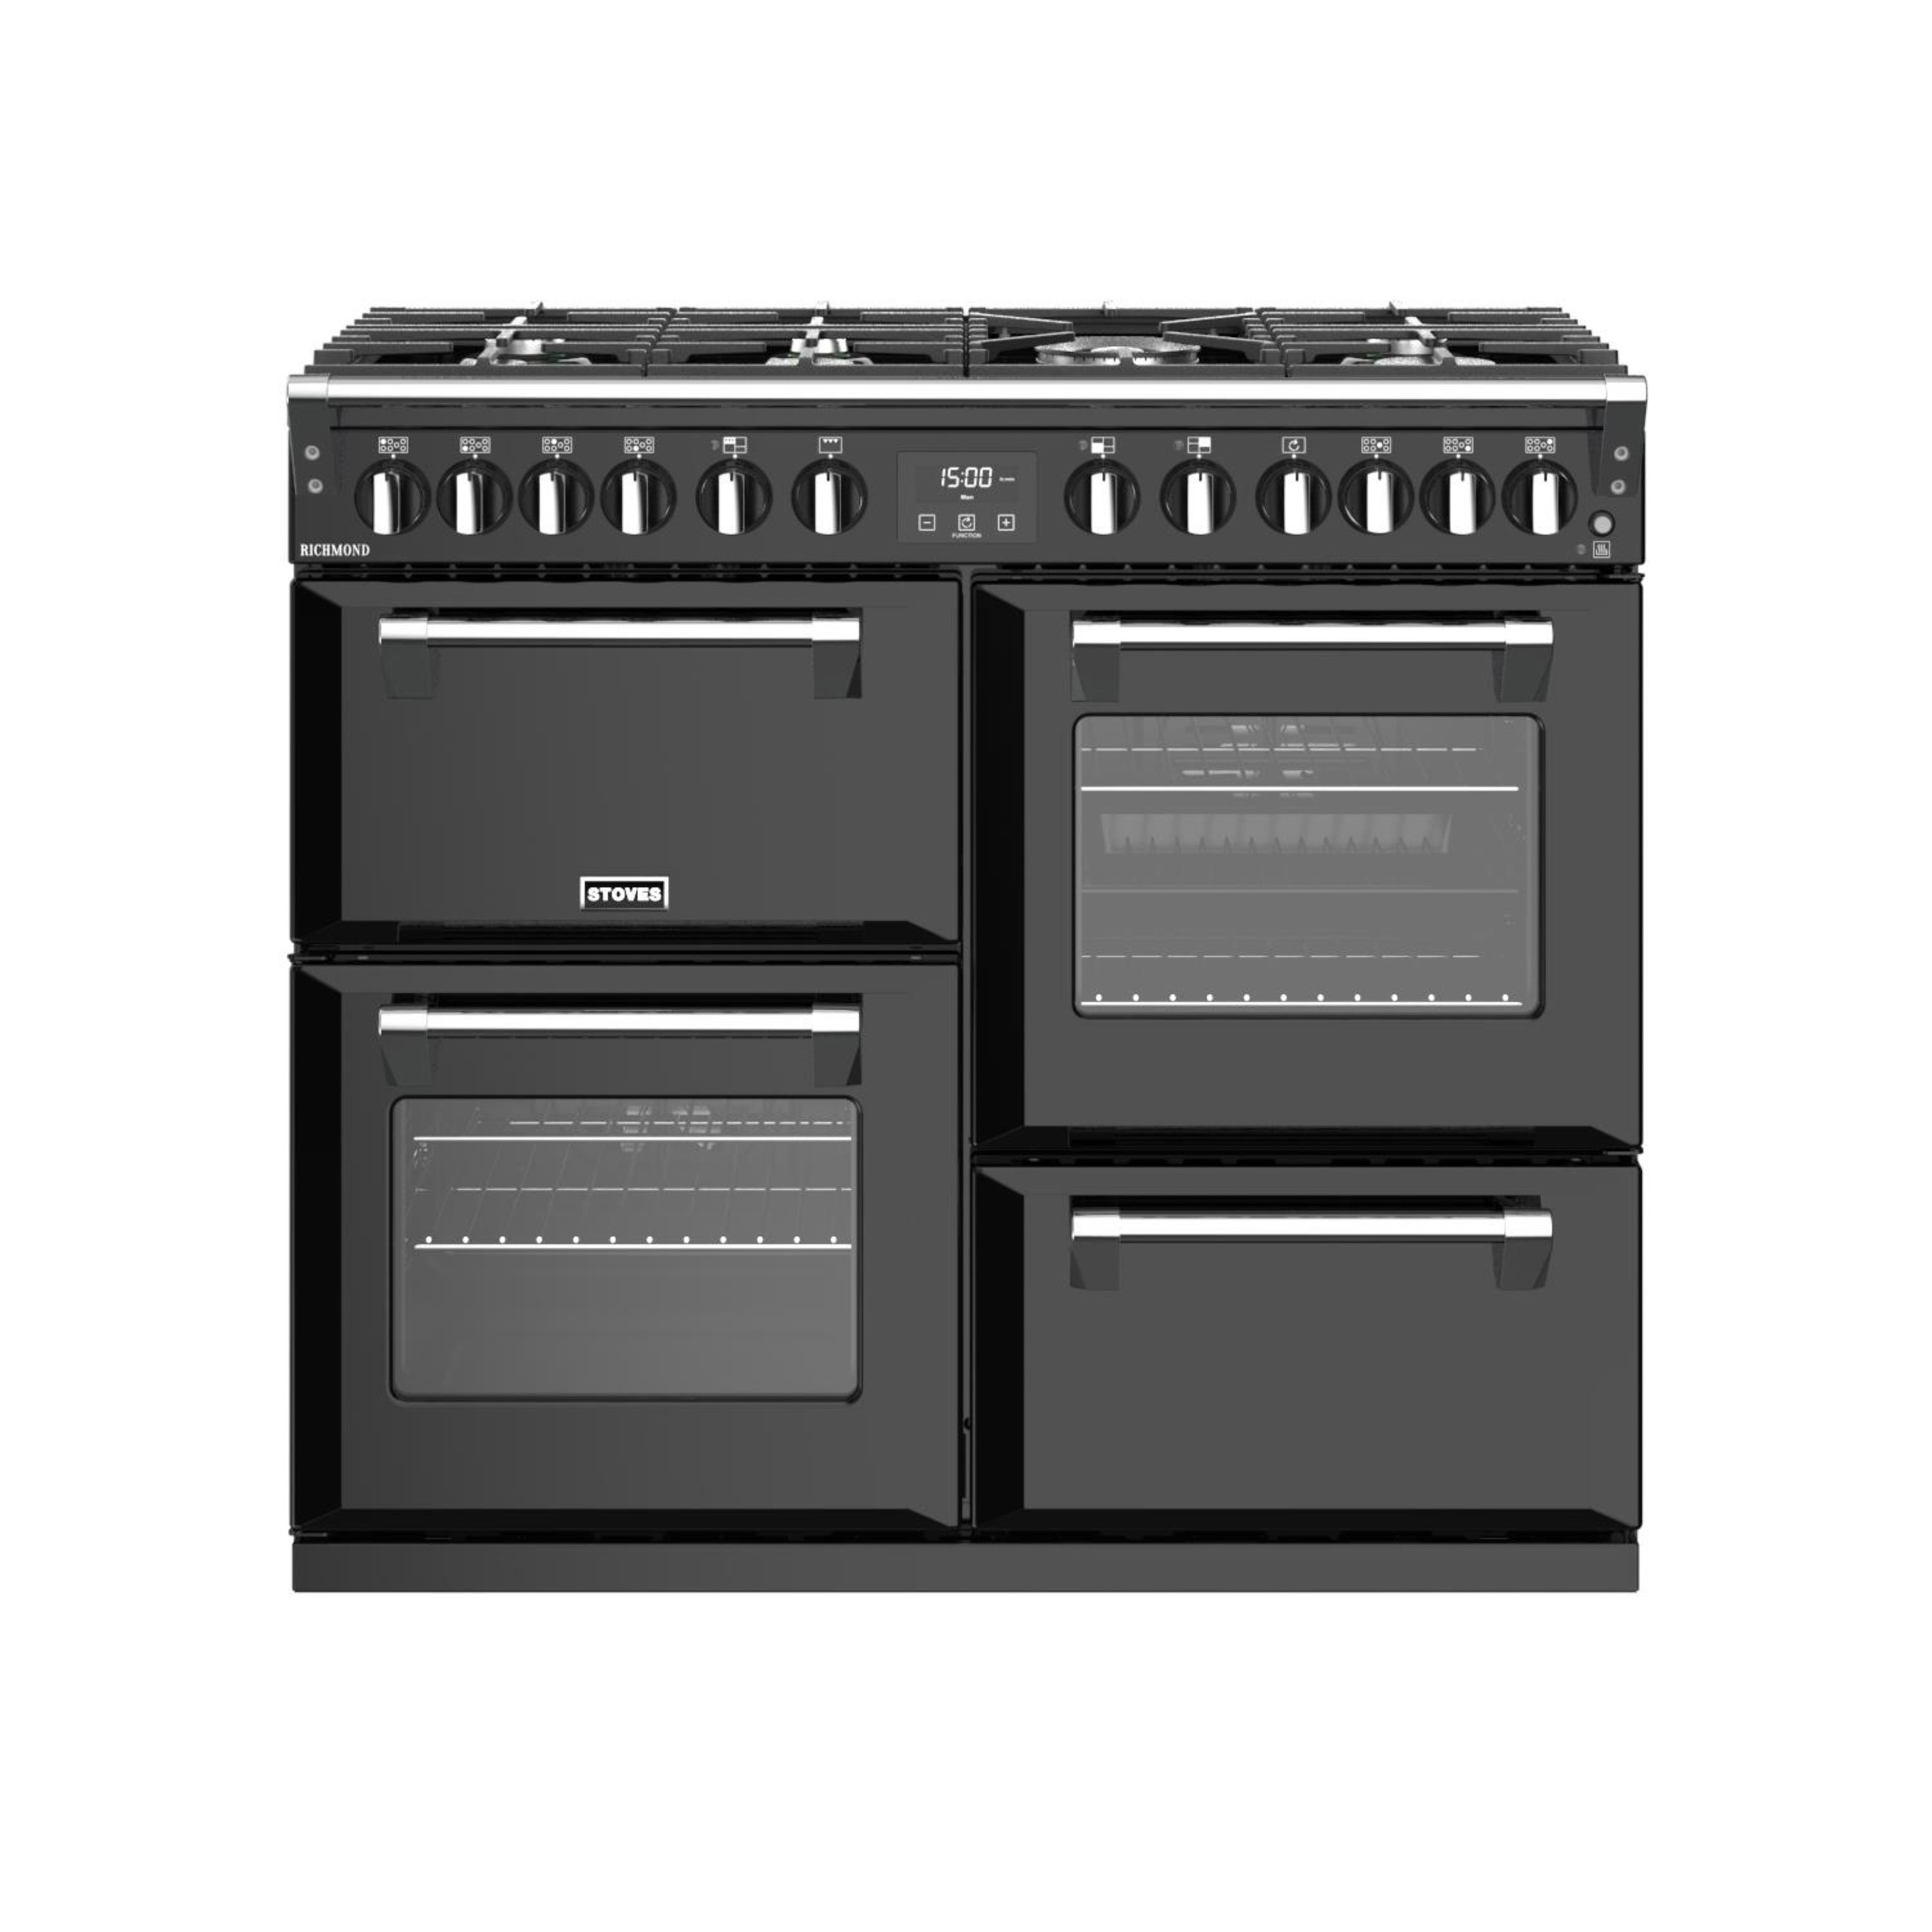 100cm dual fuel range cooker with a 7 burner gas hob, conventional oven & grill, multifunction main oven, fanned second oven, and dedicated slow cook oven